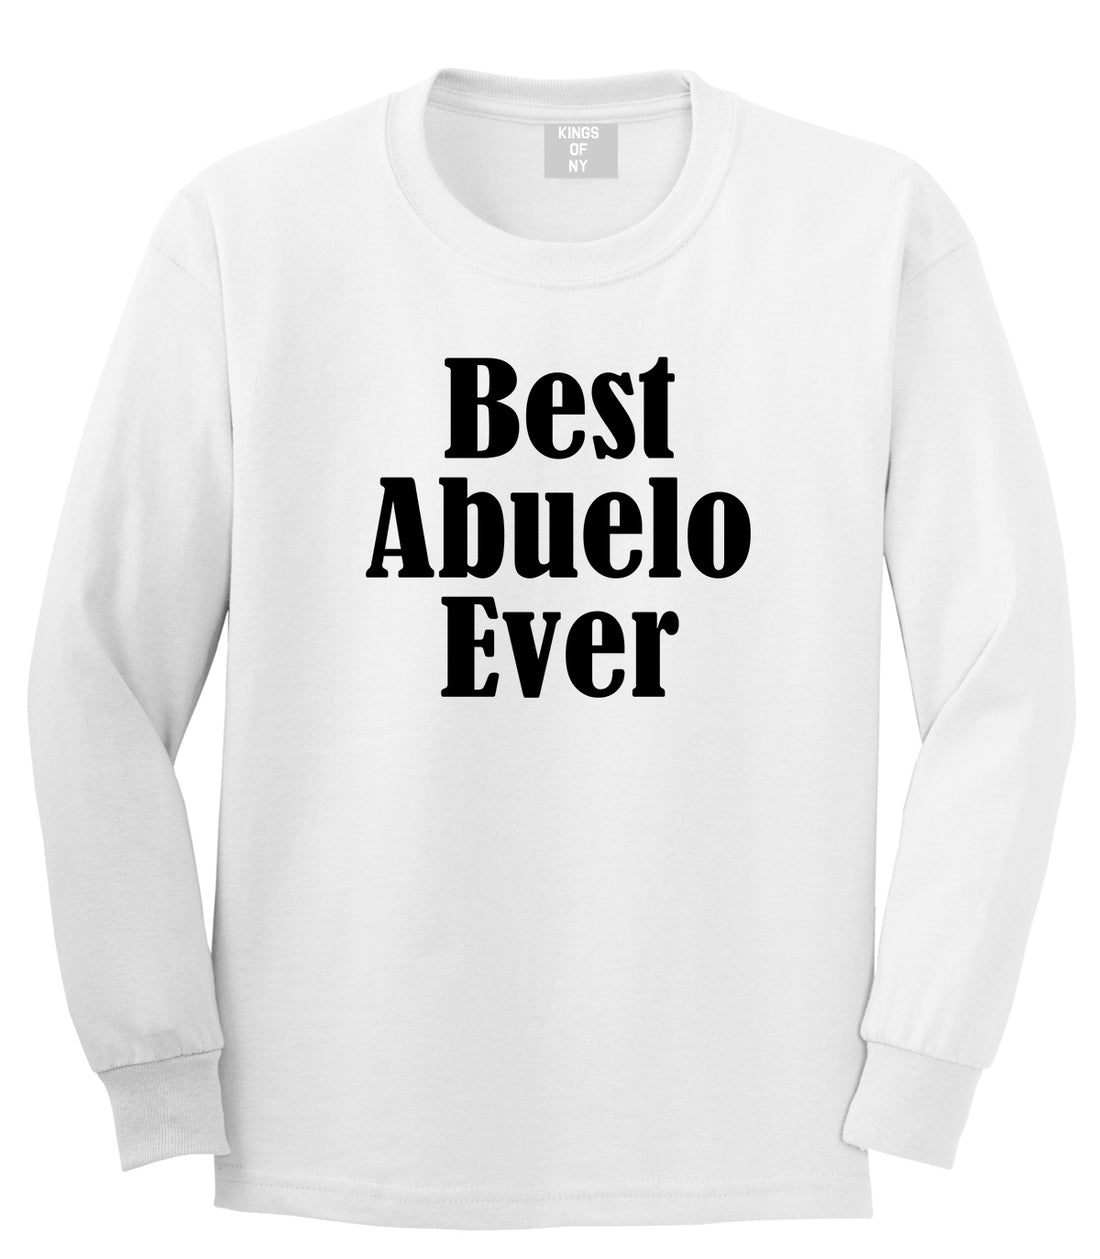 Best Abuelo Ever Grandpa Spanish Fathers Day Mens Long Sleeve T-Shirt White by Kings Of NY